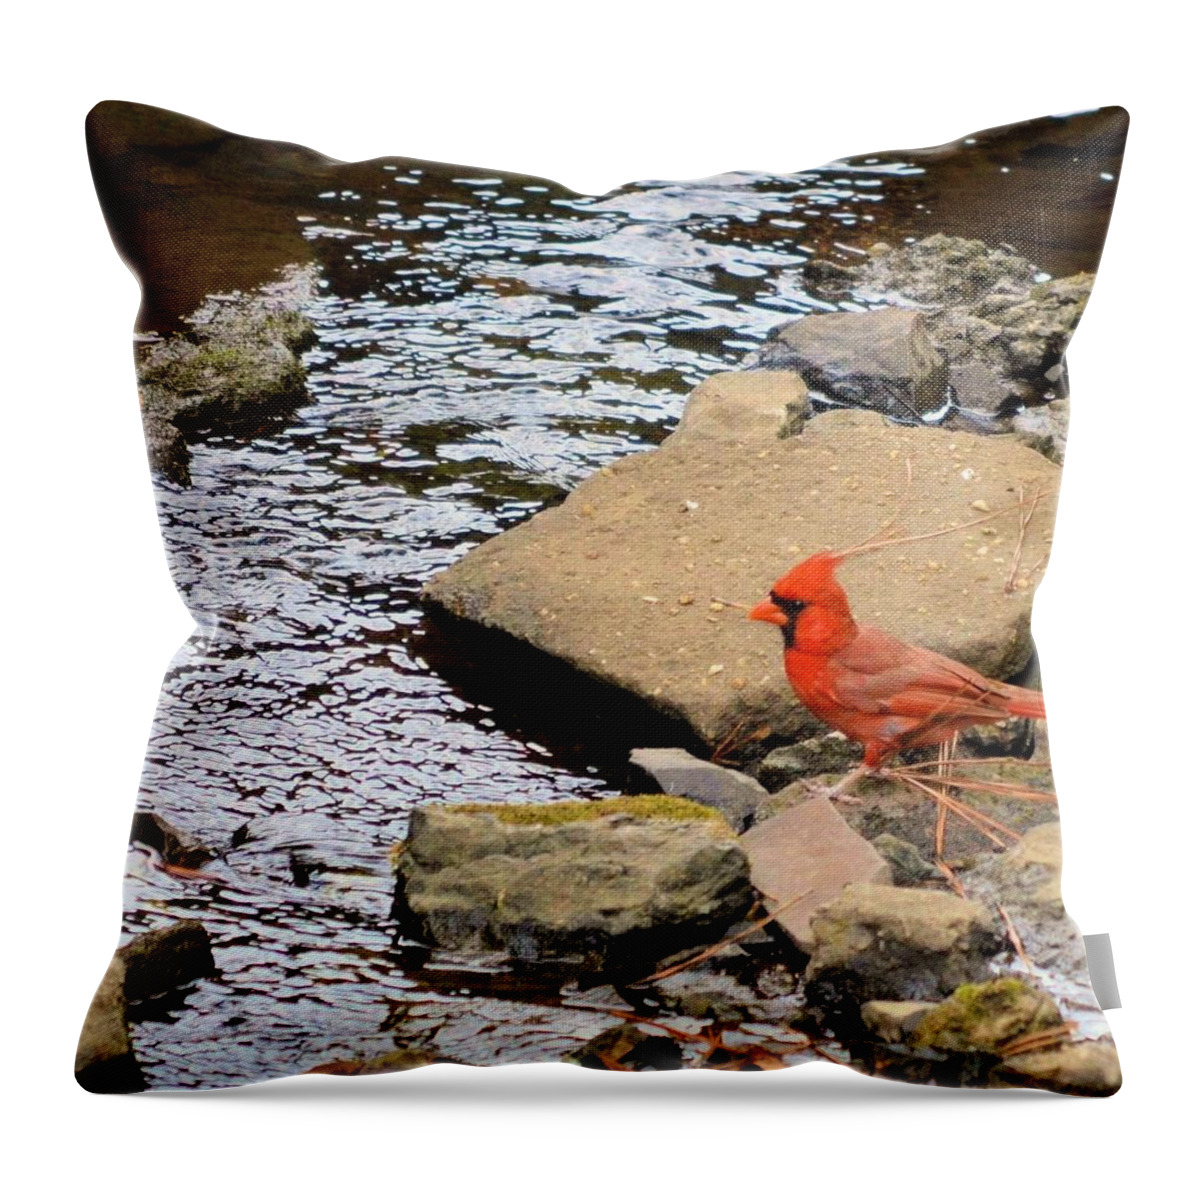 Cardinal By The Creek Throw Pillow featuring the photograph Cardinal By the Creek by Maria Urso